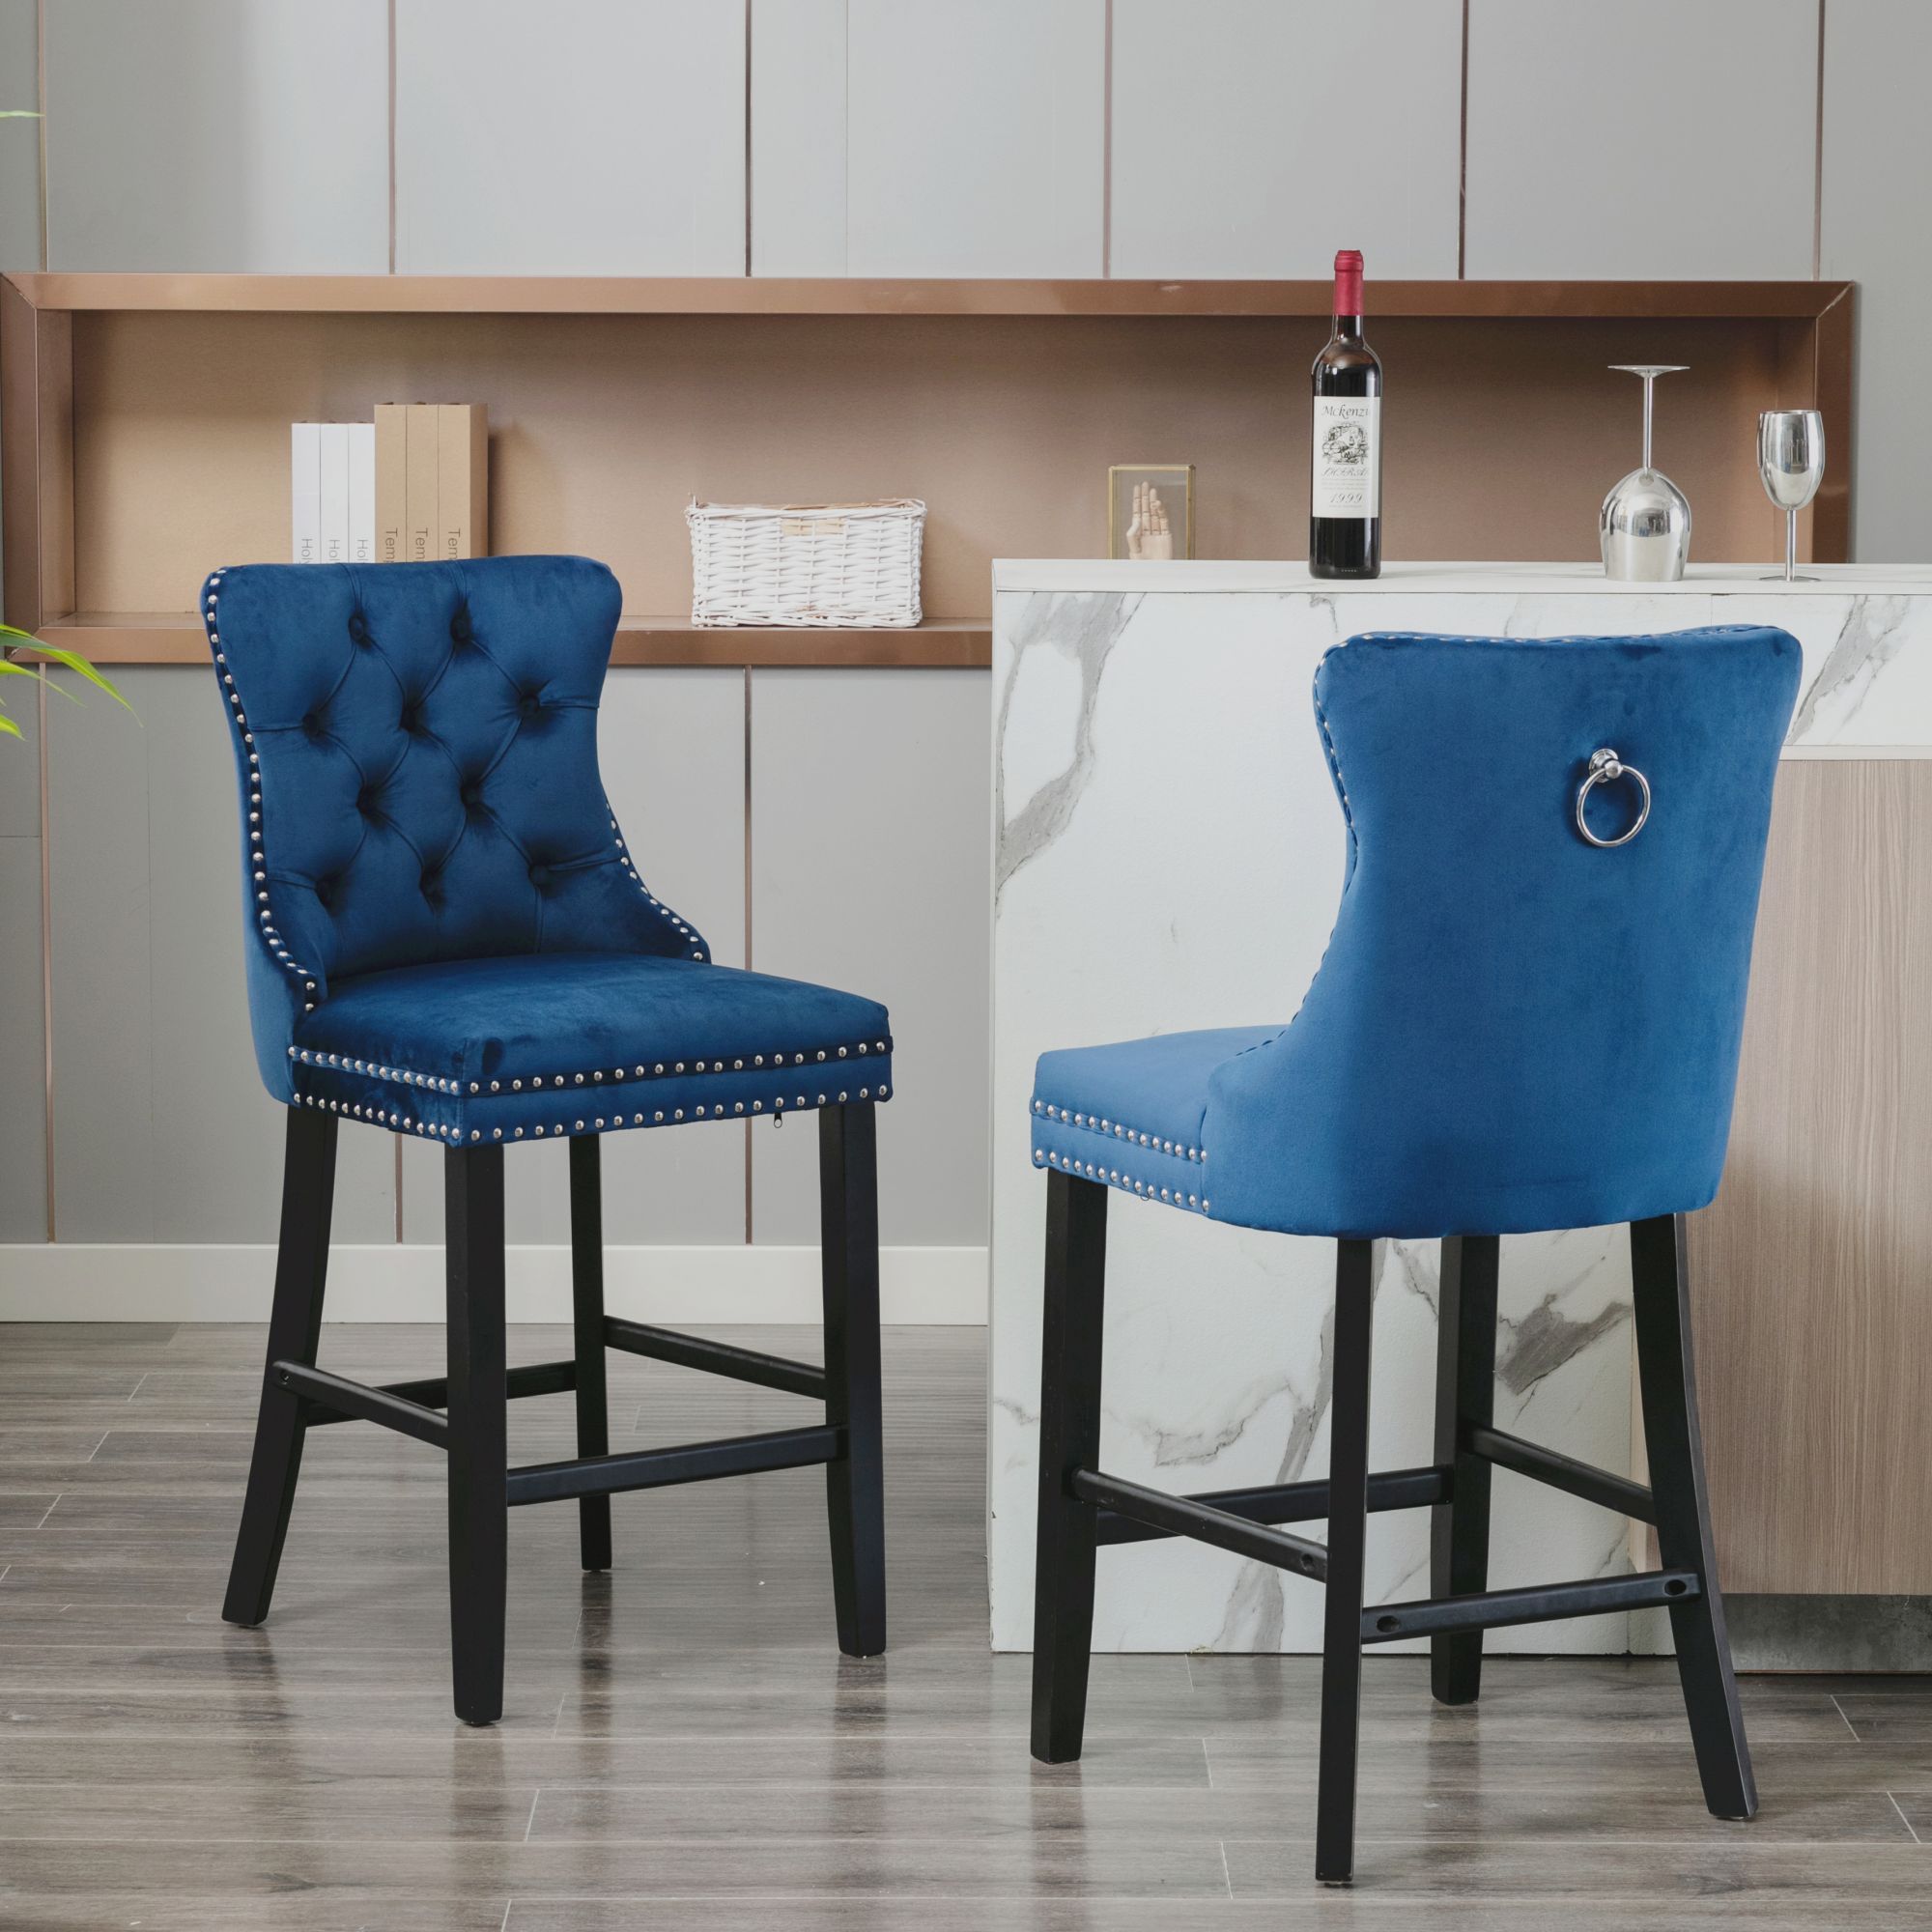 Contemporary Velvet Upholstered Bar-stools with Chrome Nail-head Trim,Set of 2